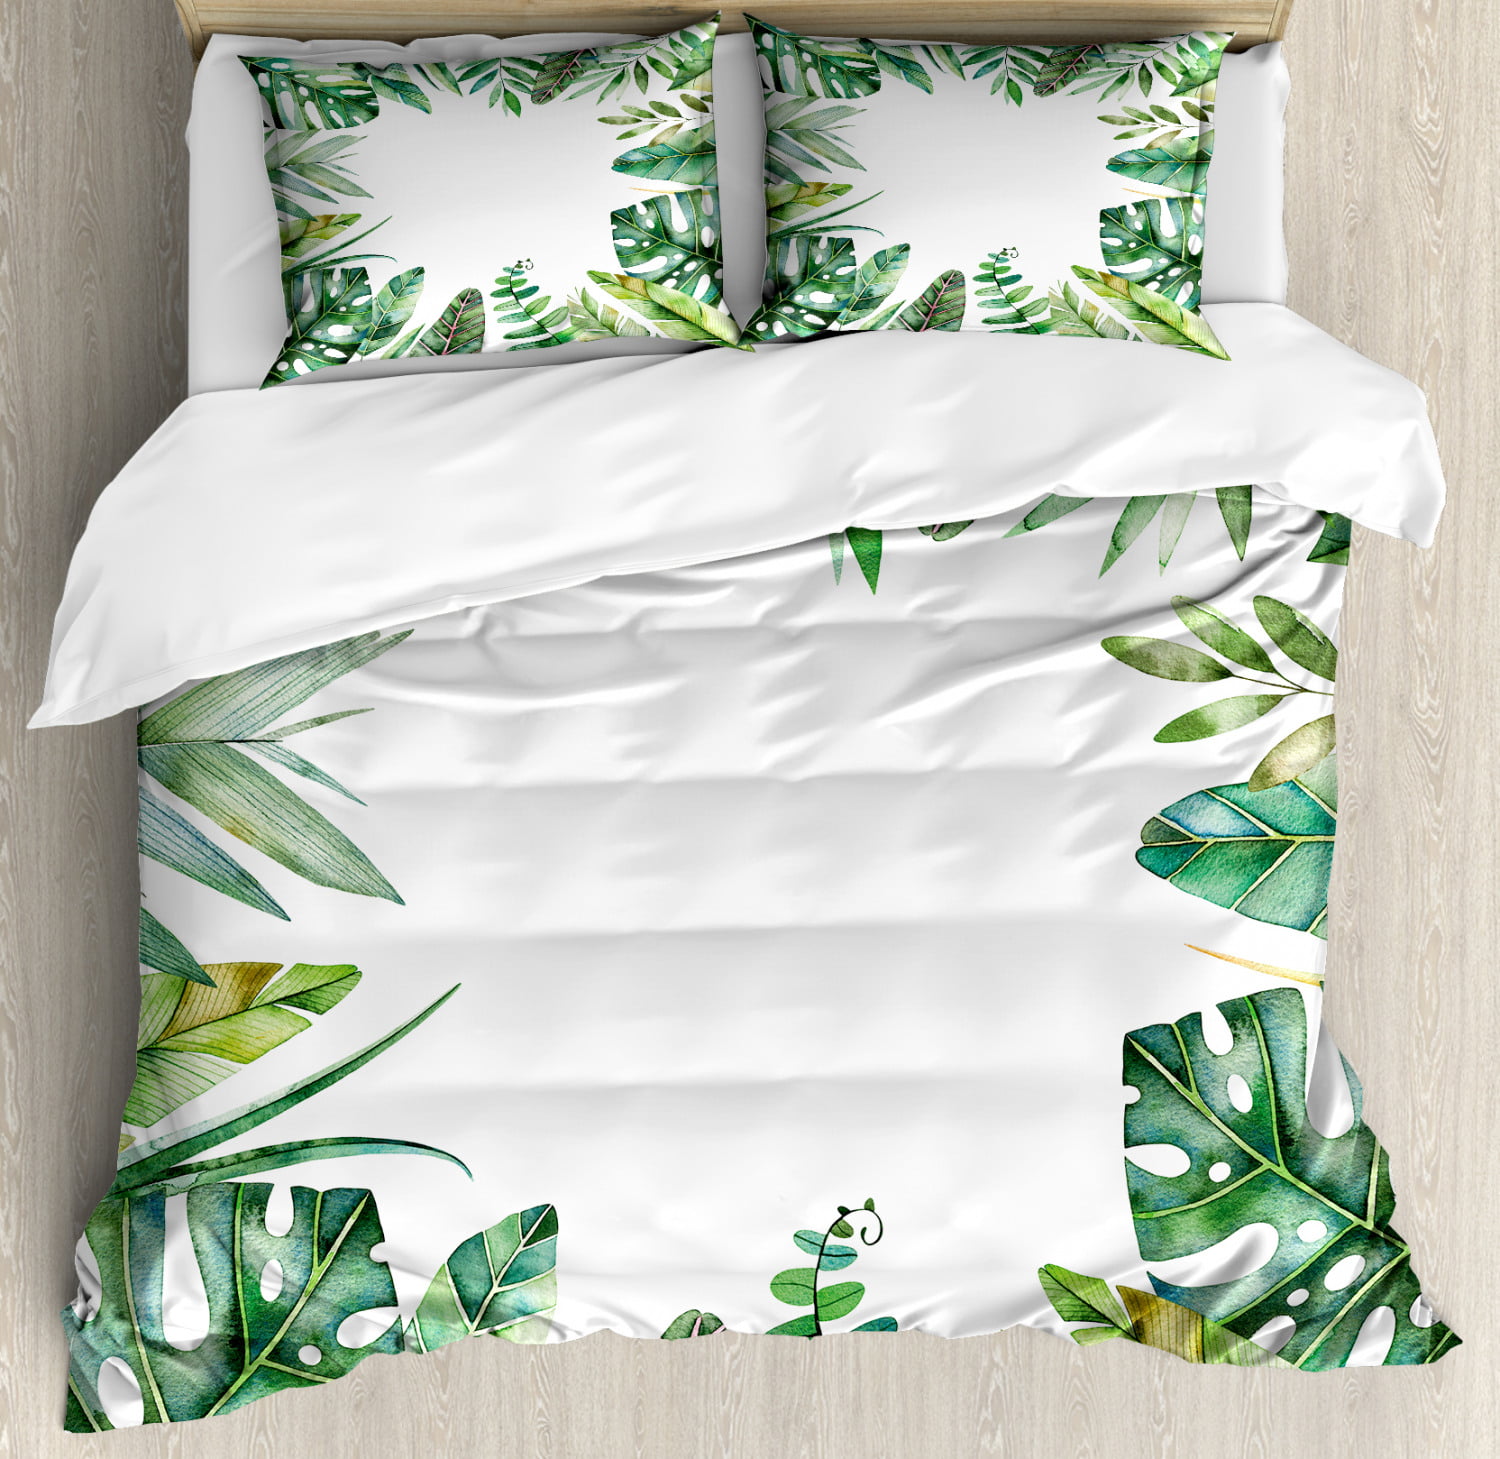 Plant Duvet Cover Set, Interesting Jungle Themed Picture with Leaves ...